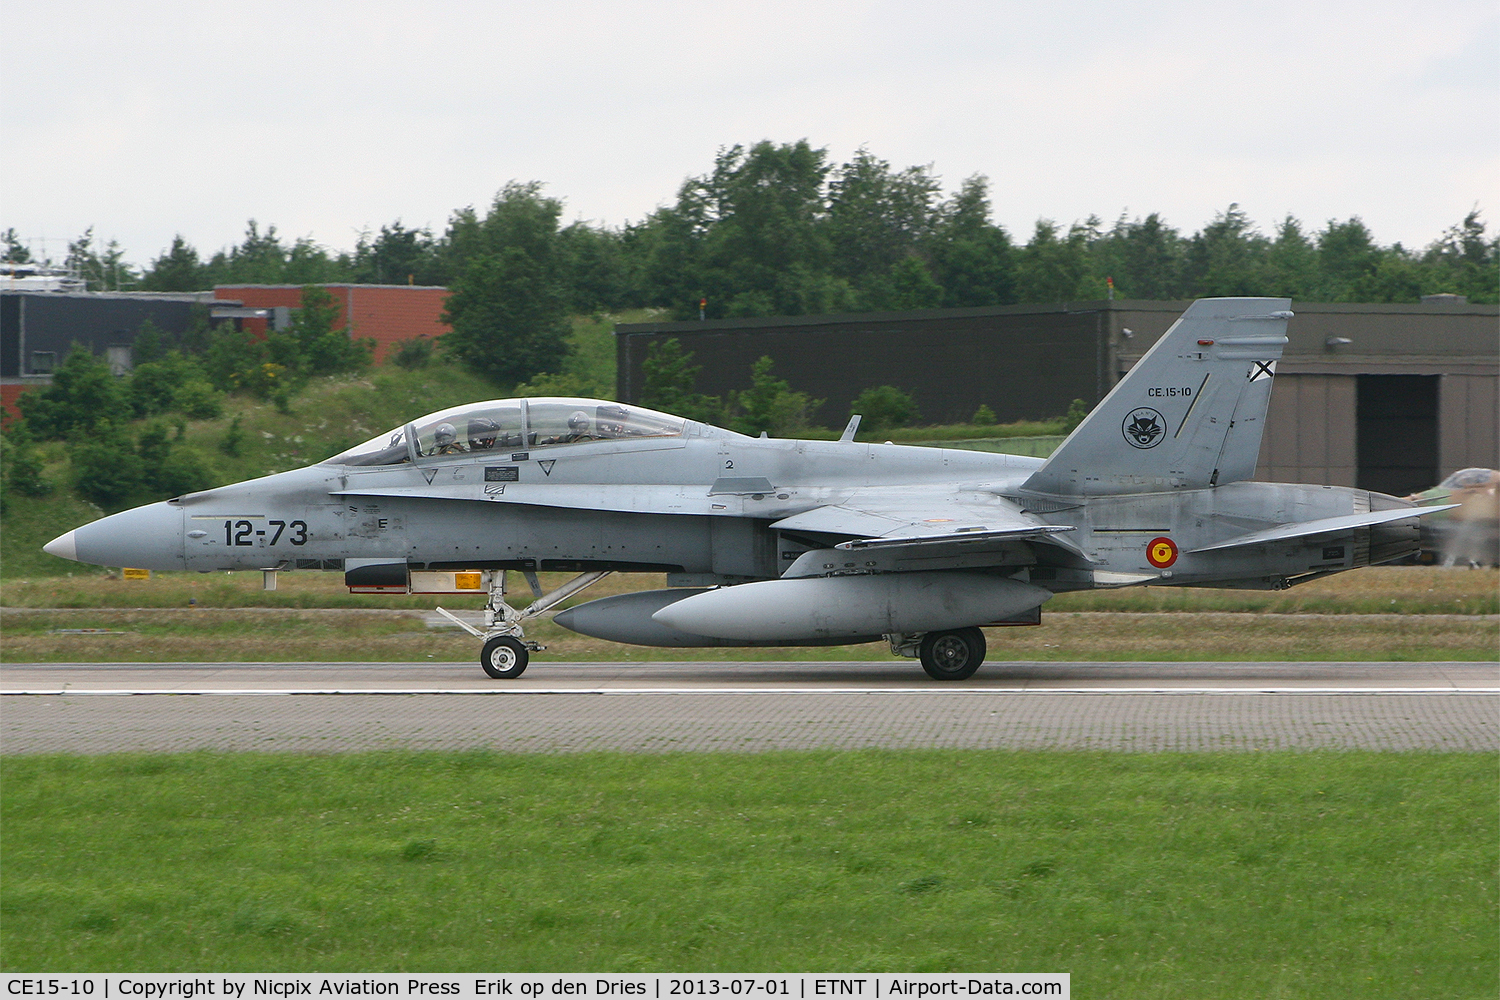 CE15-10, McDonnell Douglas EF-18BM Hornet C/N 0523/B089, CE.15-10 participated in the static show of the Wittmund Open House